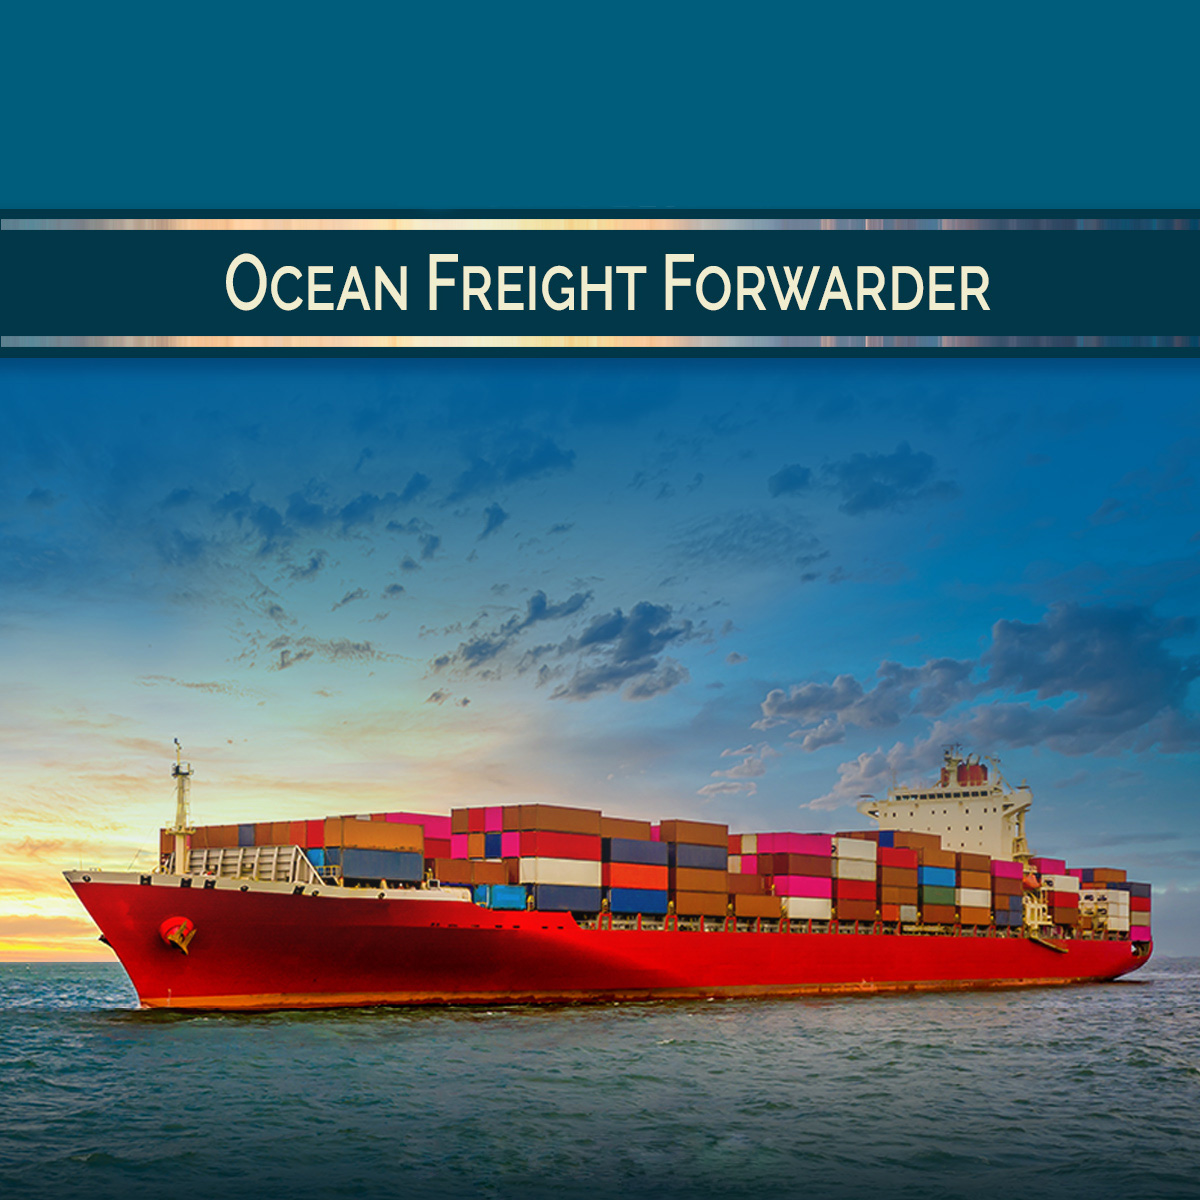 What Does a Freight Forwarder do